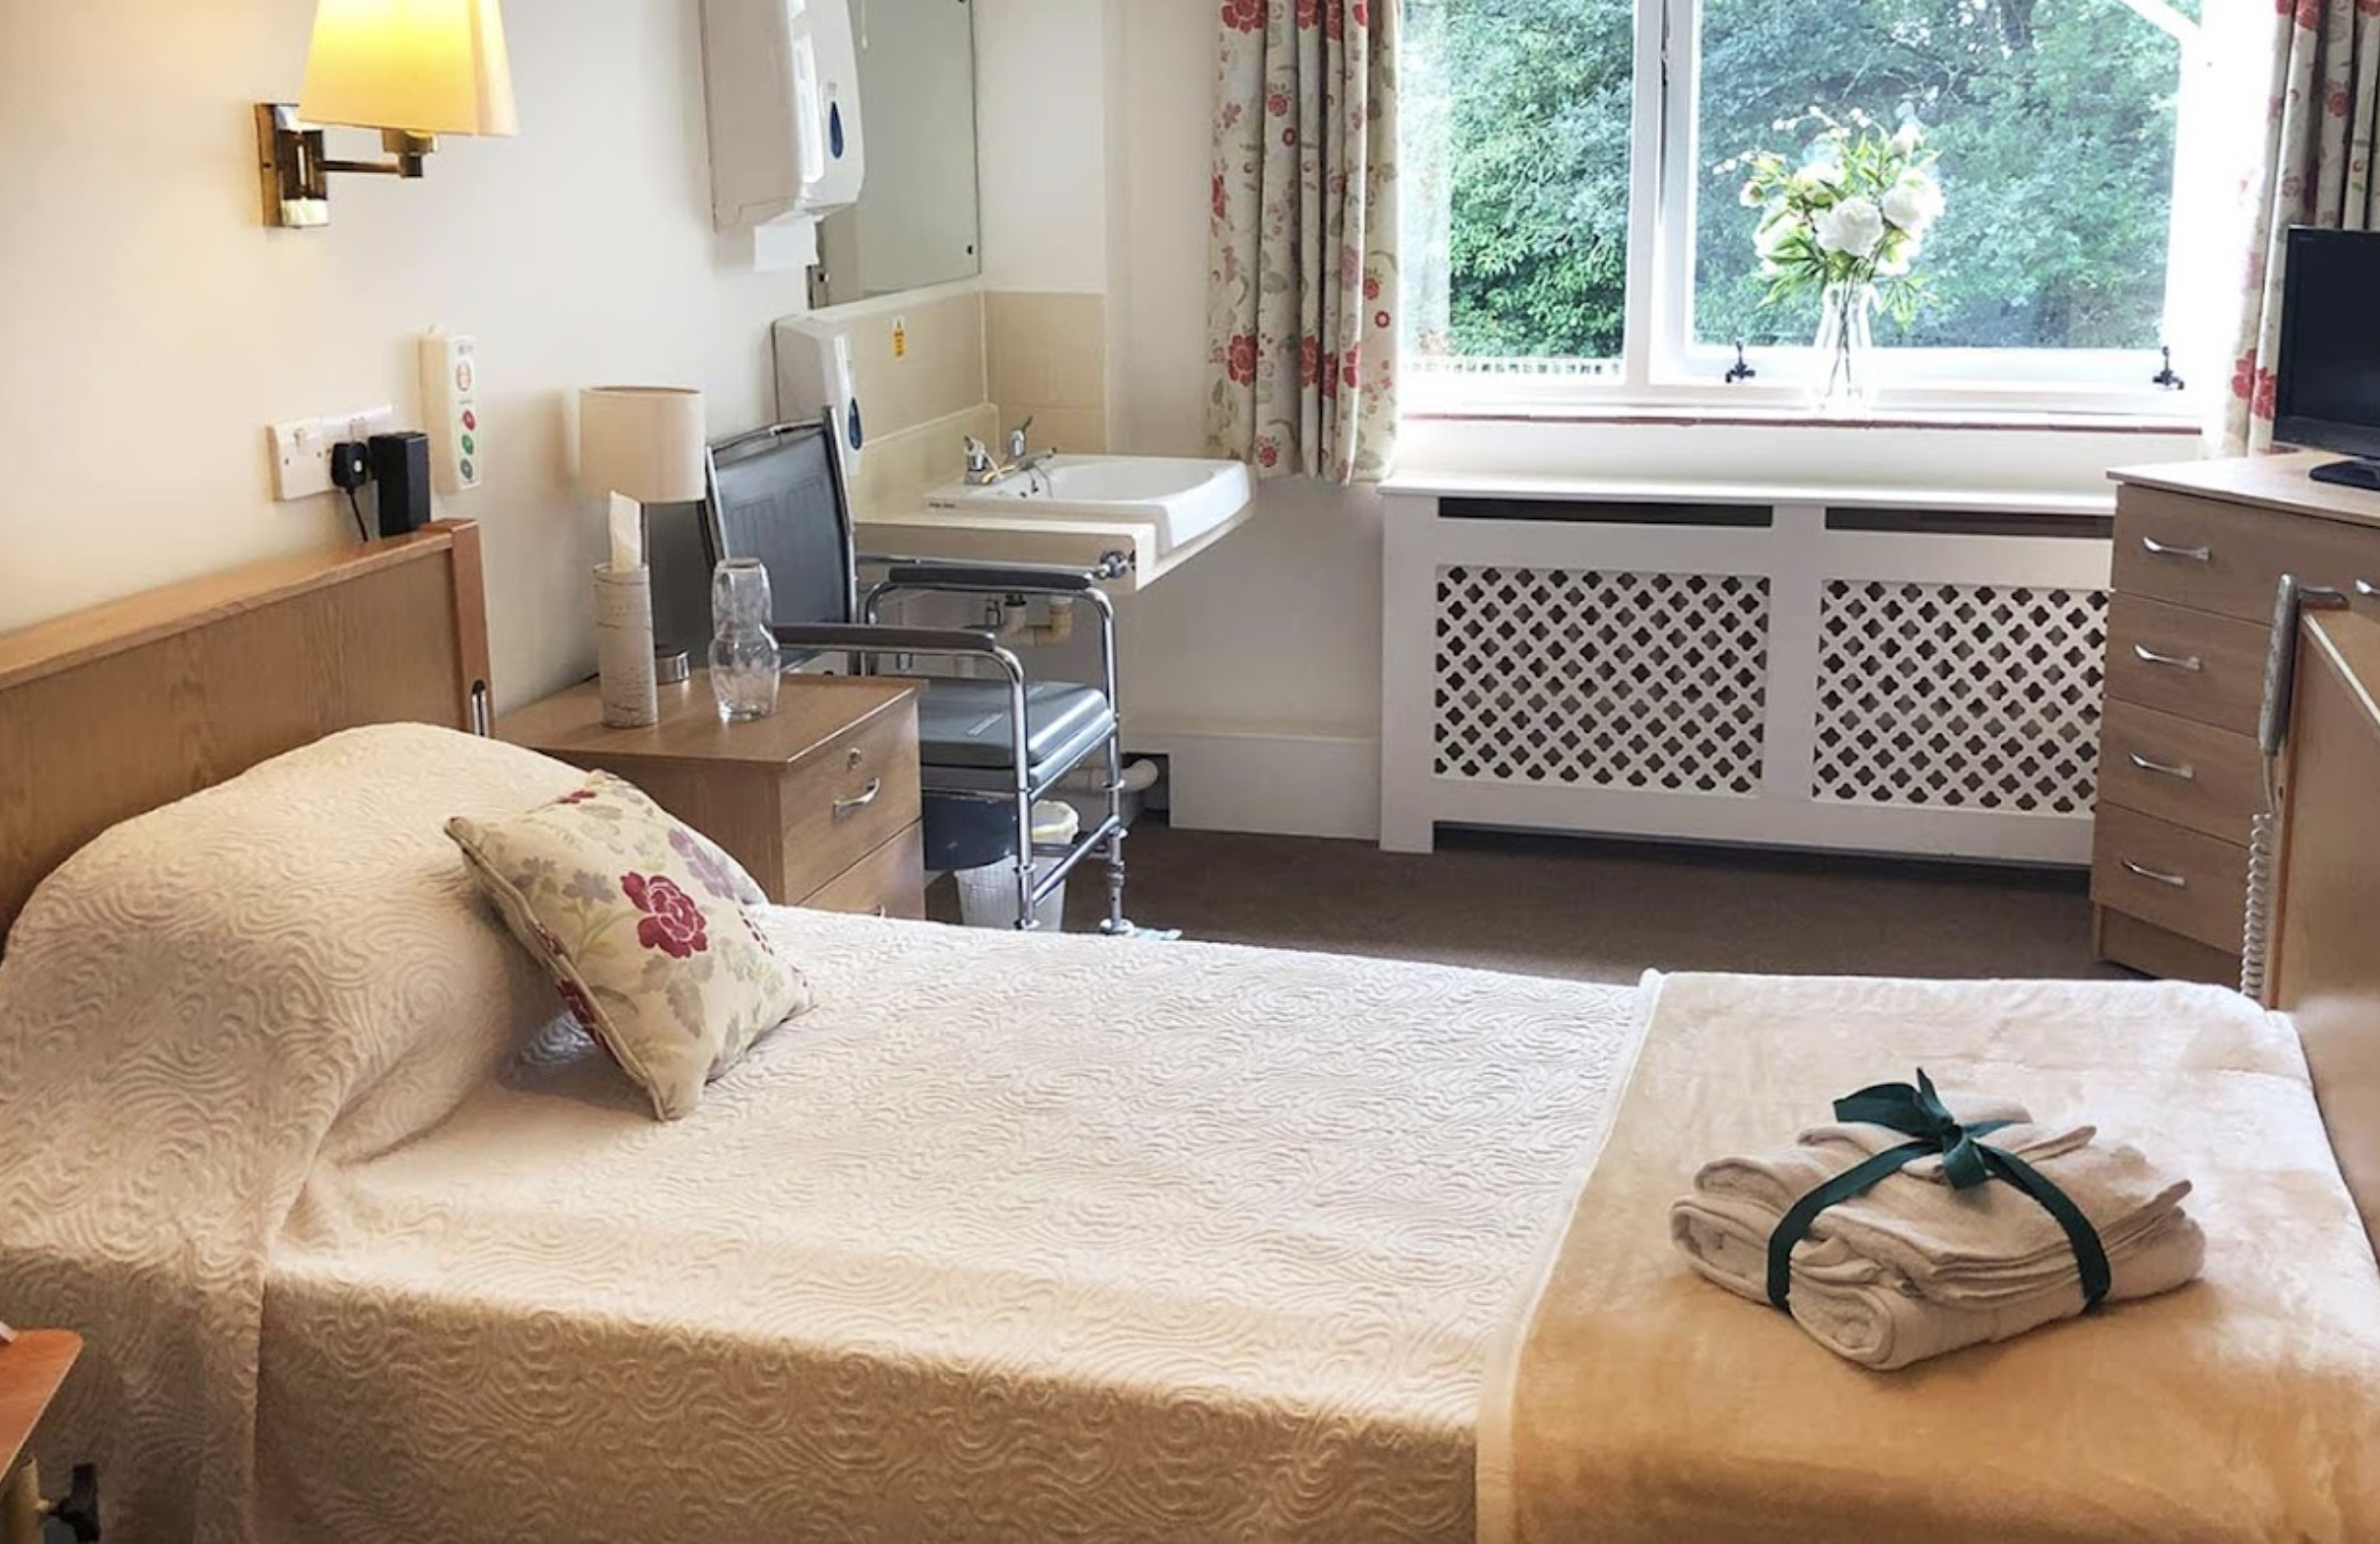 Bedroom of Elizabeth House care home in Poole, Hampshire